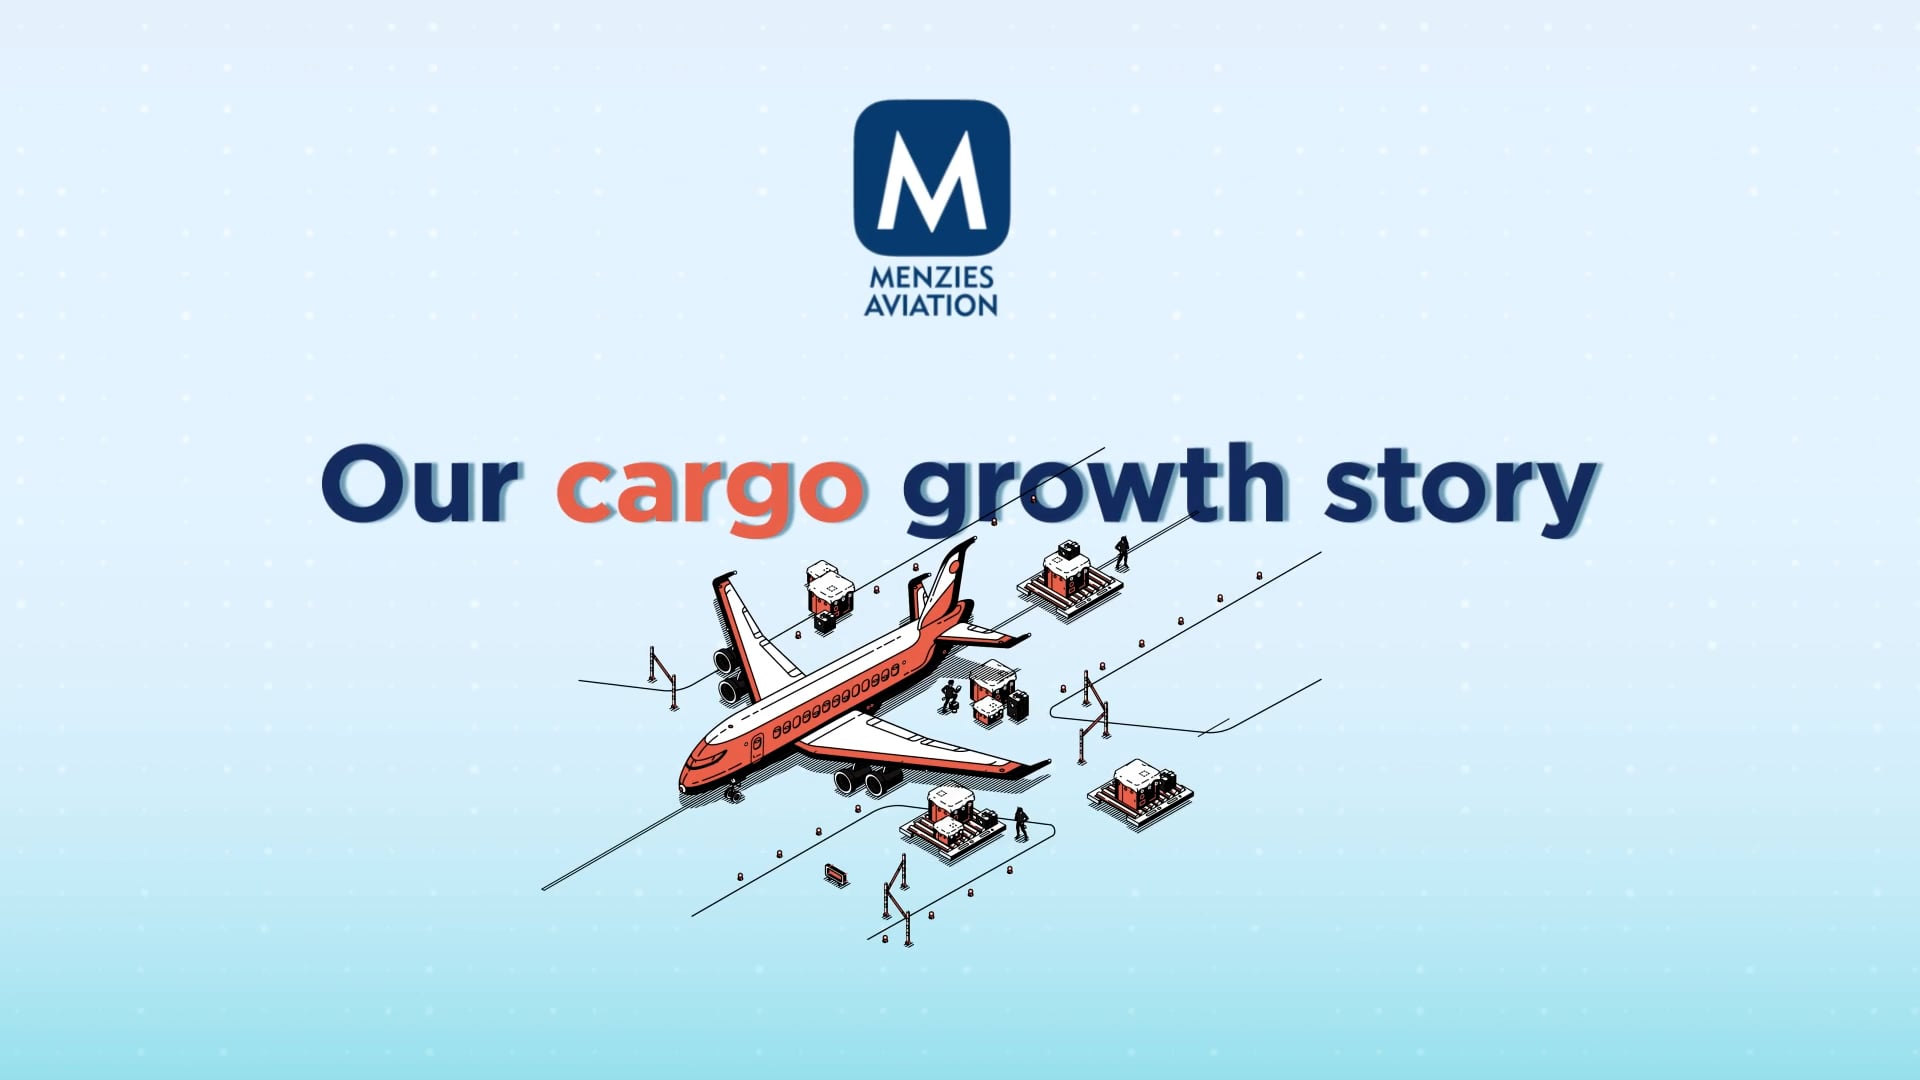 Menzies Aviation - Our cargo growth story